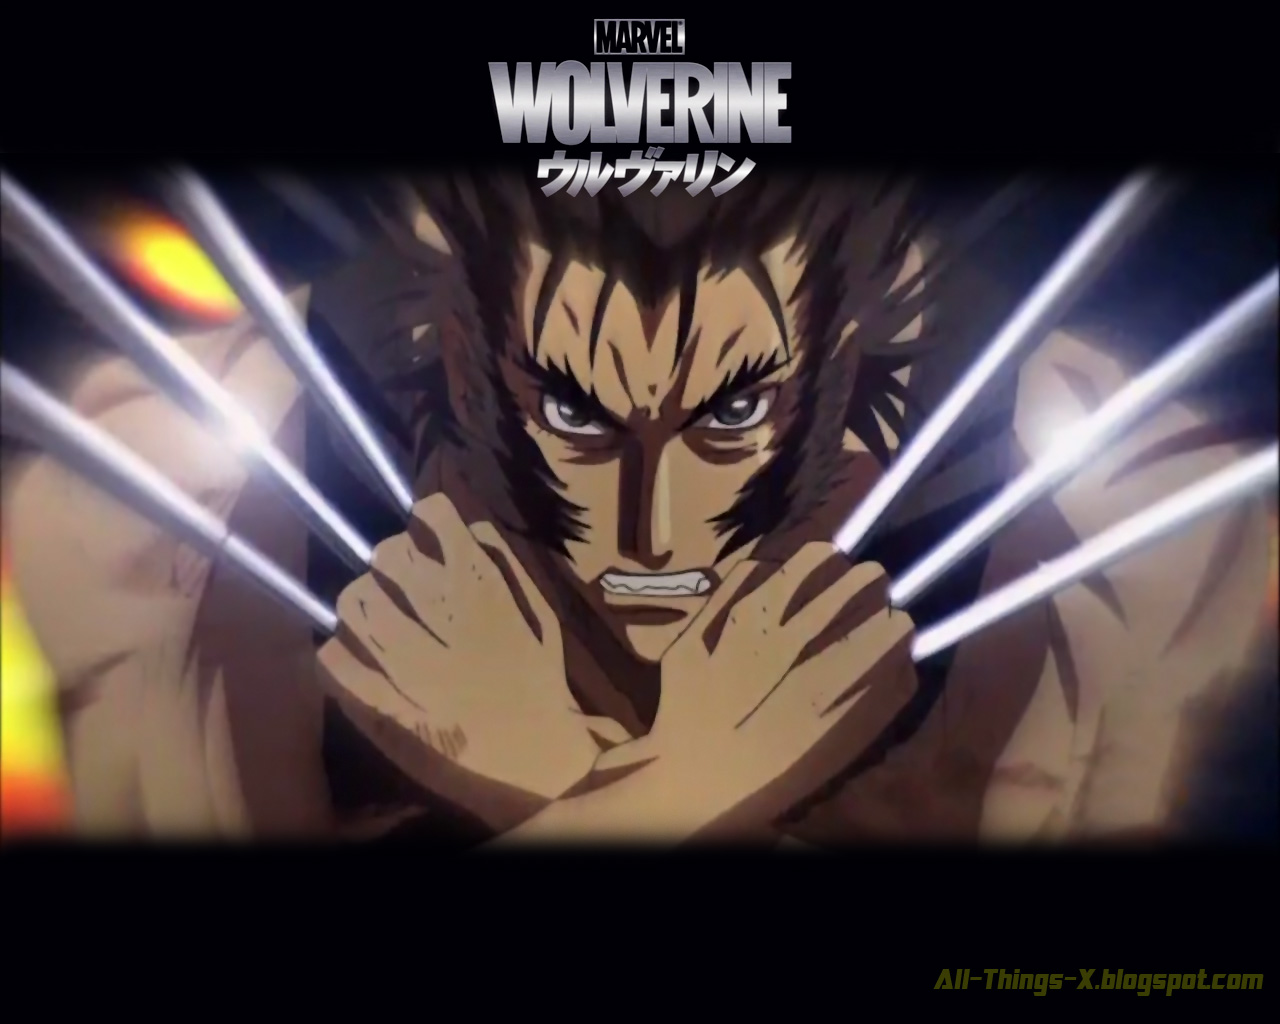 And why leave out the Wolverine anime villains?? They deserve their ...